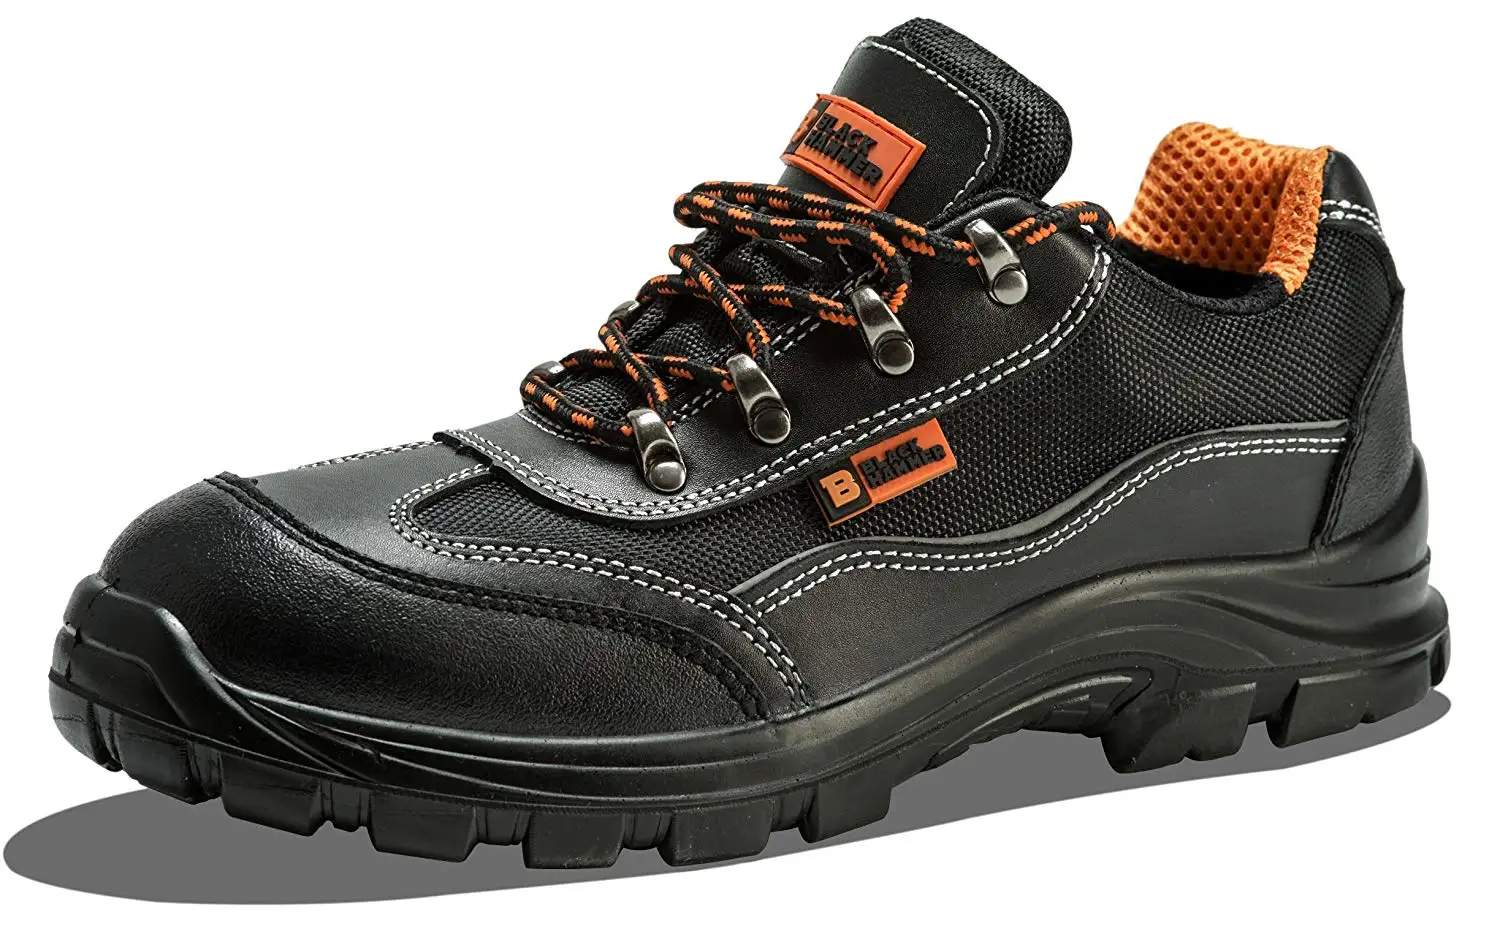 Cheap Converse Steel Toe Sneakers, find Converse Steel Toe Sneakers deals on line at Alibaba.com